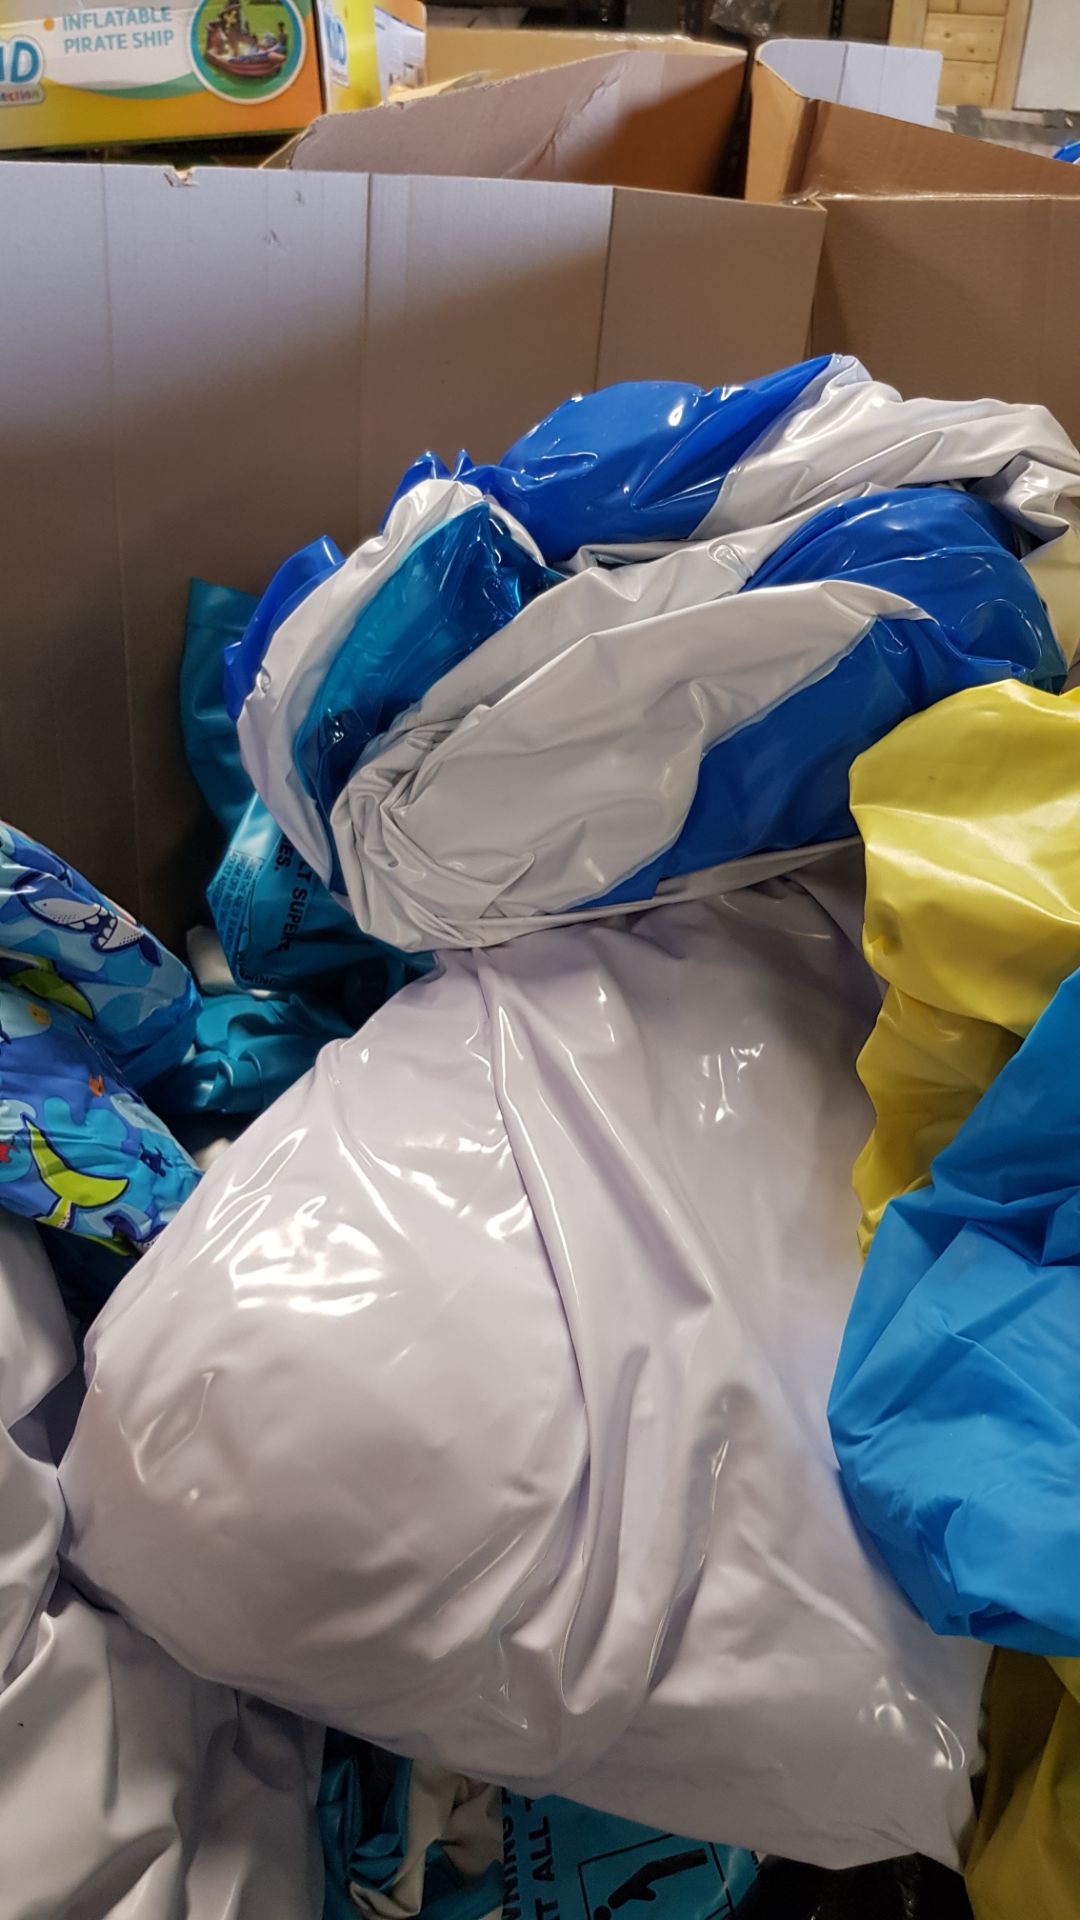 (165/P) Trader’s Lot – Contents Of Full Pallet. A Quantity Of Mixed Kid’s Connection Inflatable I... - Image 16 of 17